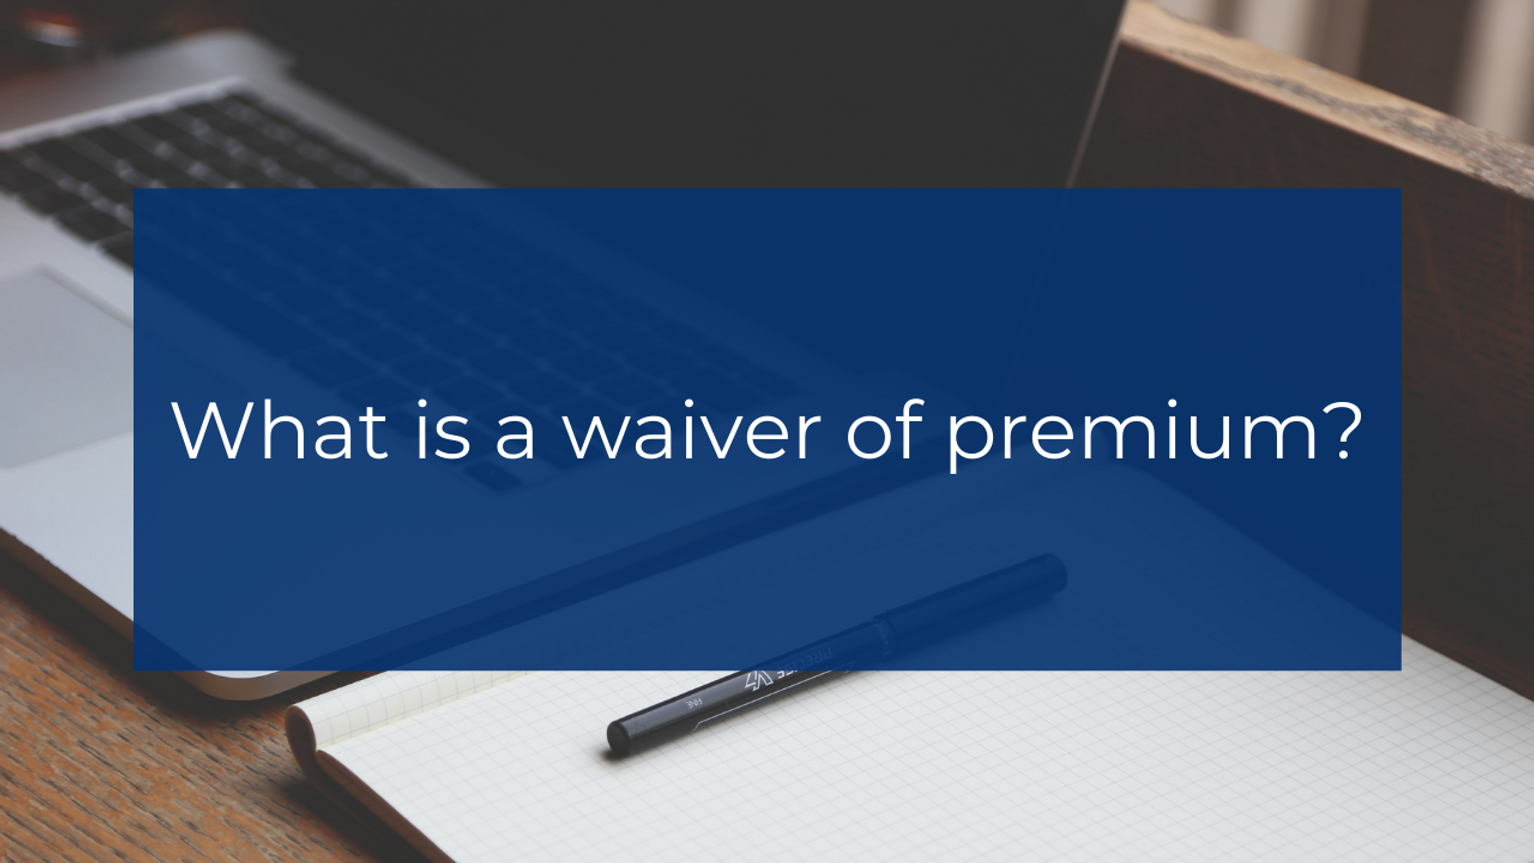 What is a waiver of premium?